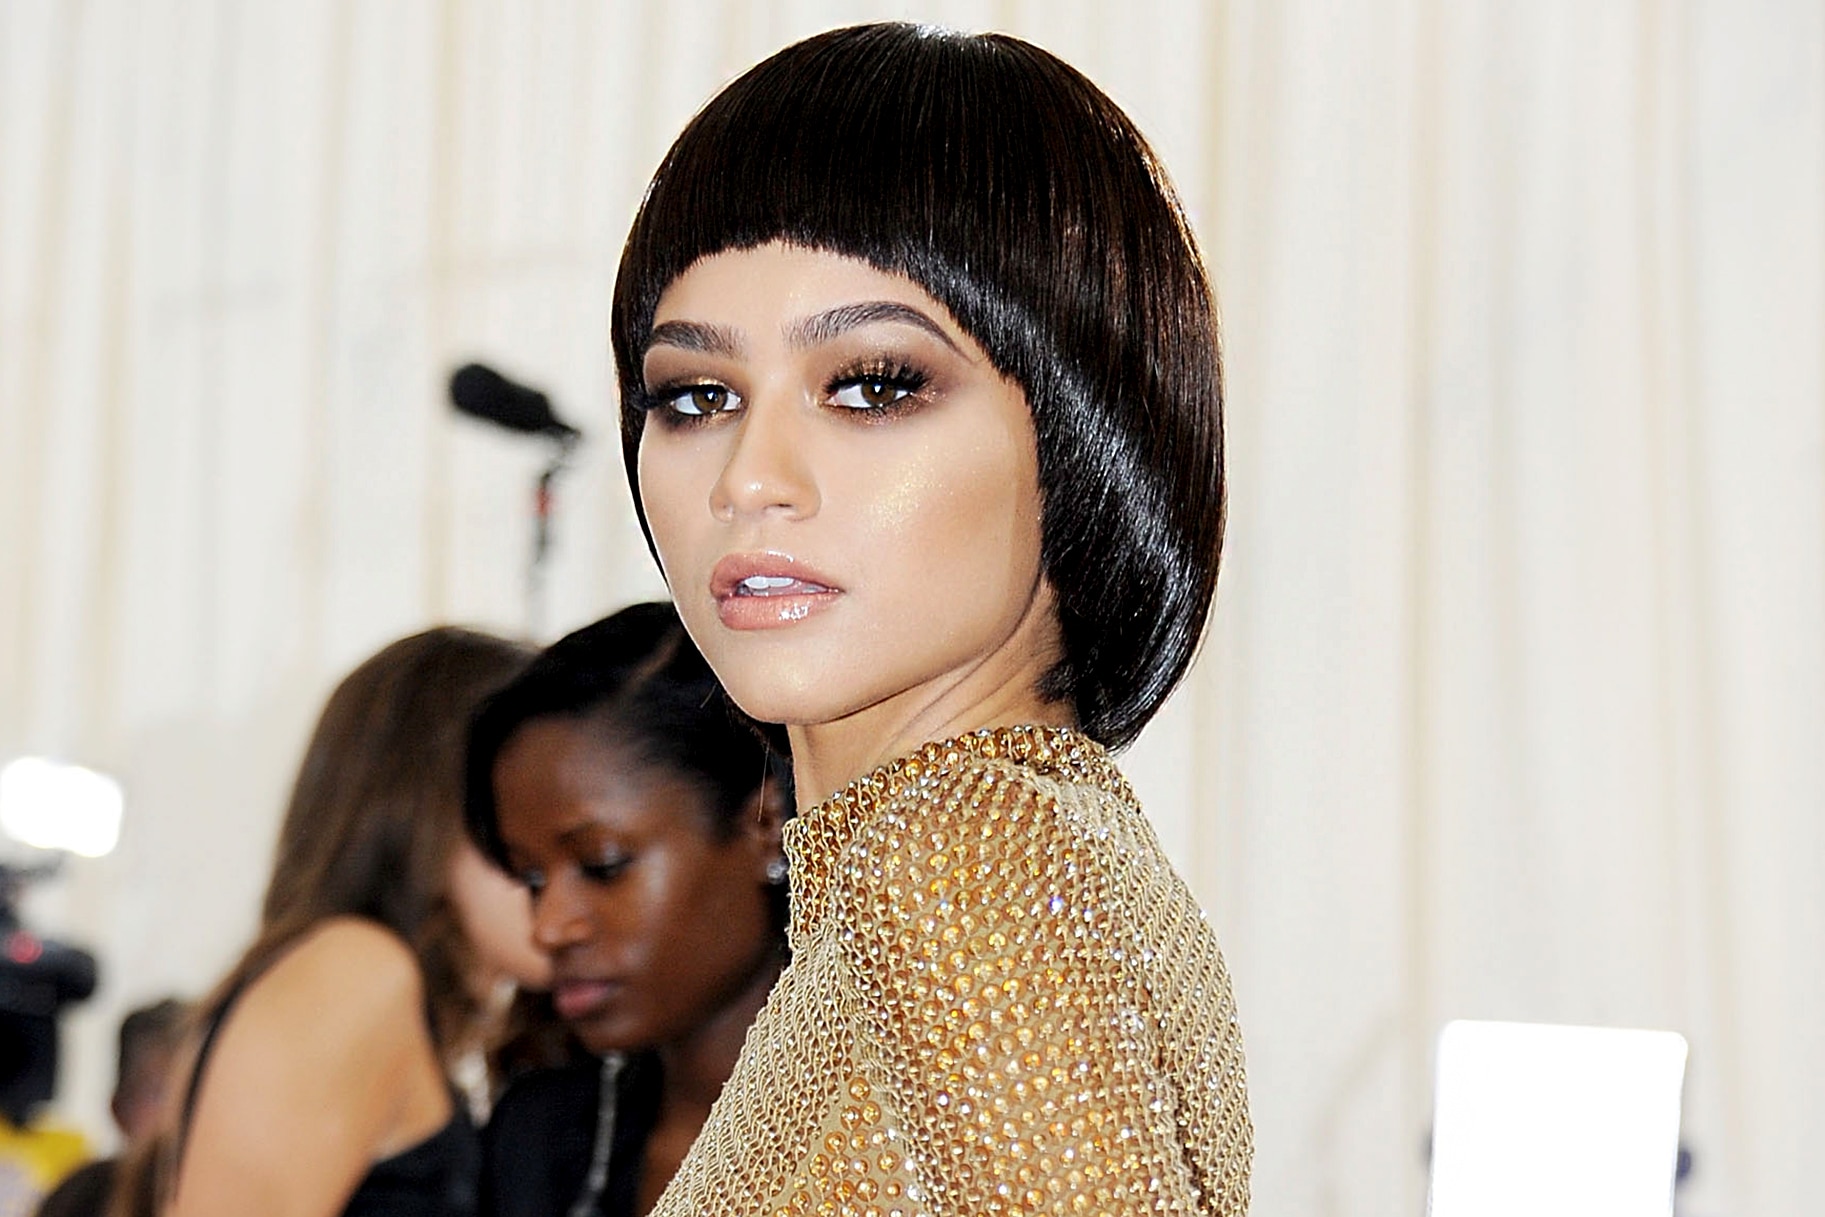 Zendaya Says She Was 'Dragged' for Wearing a Mullet in 2016